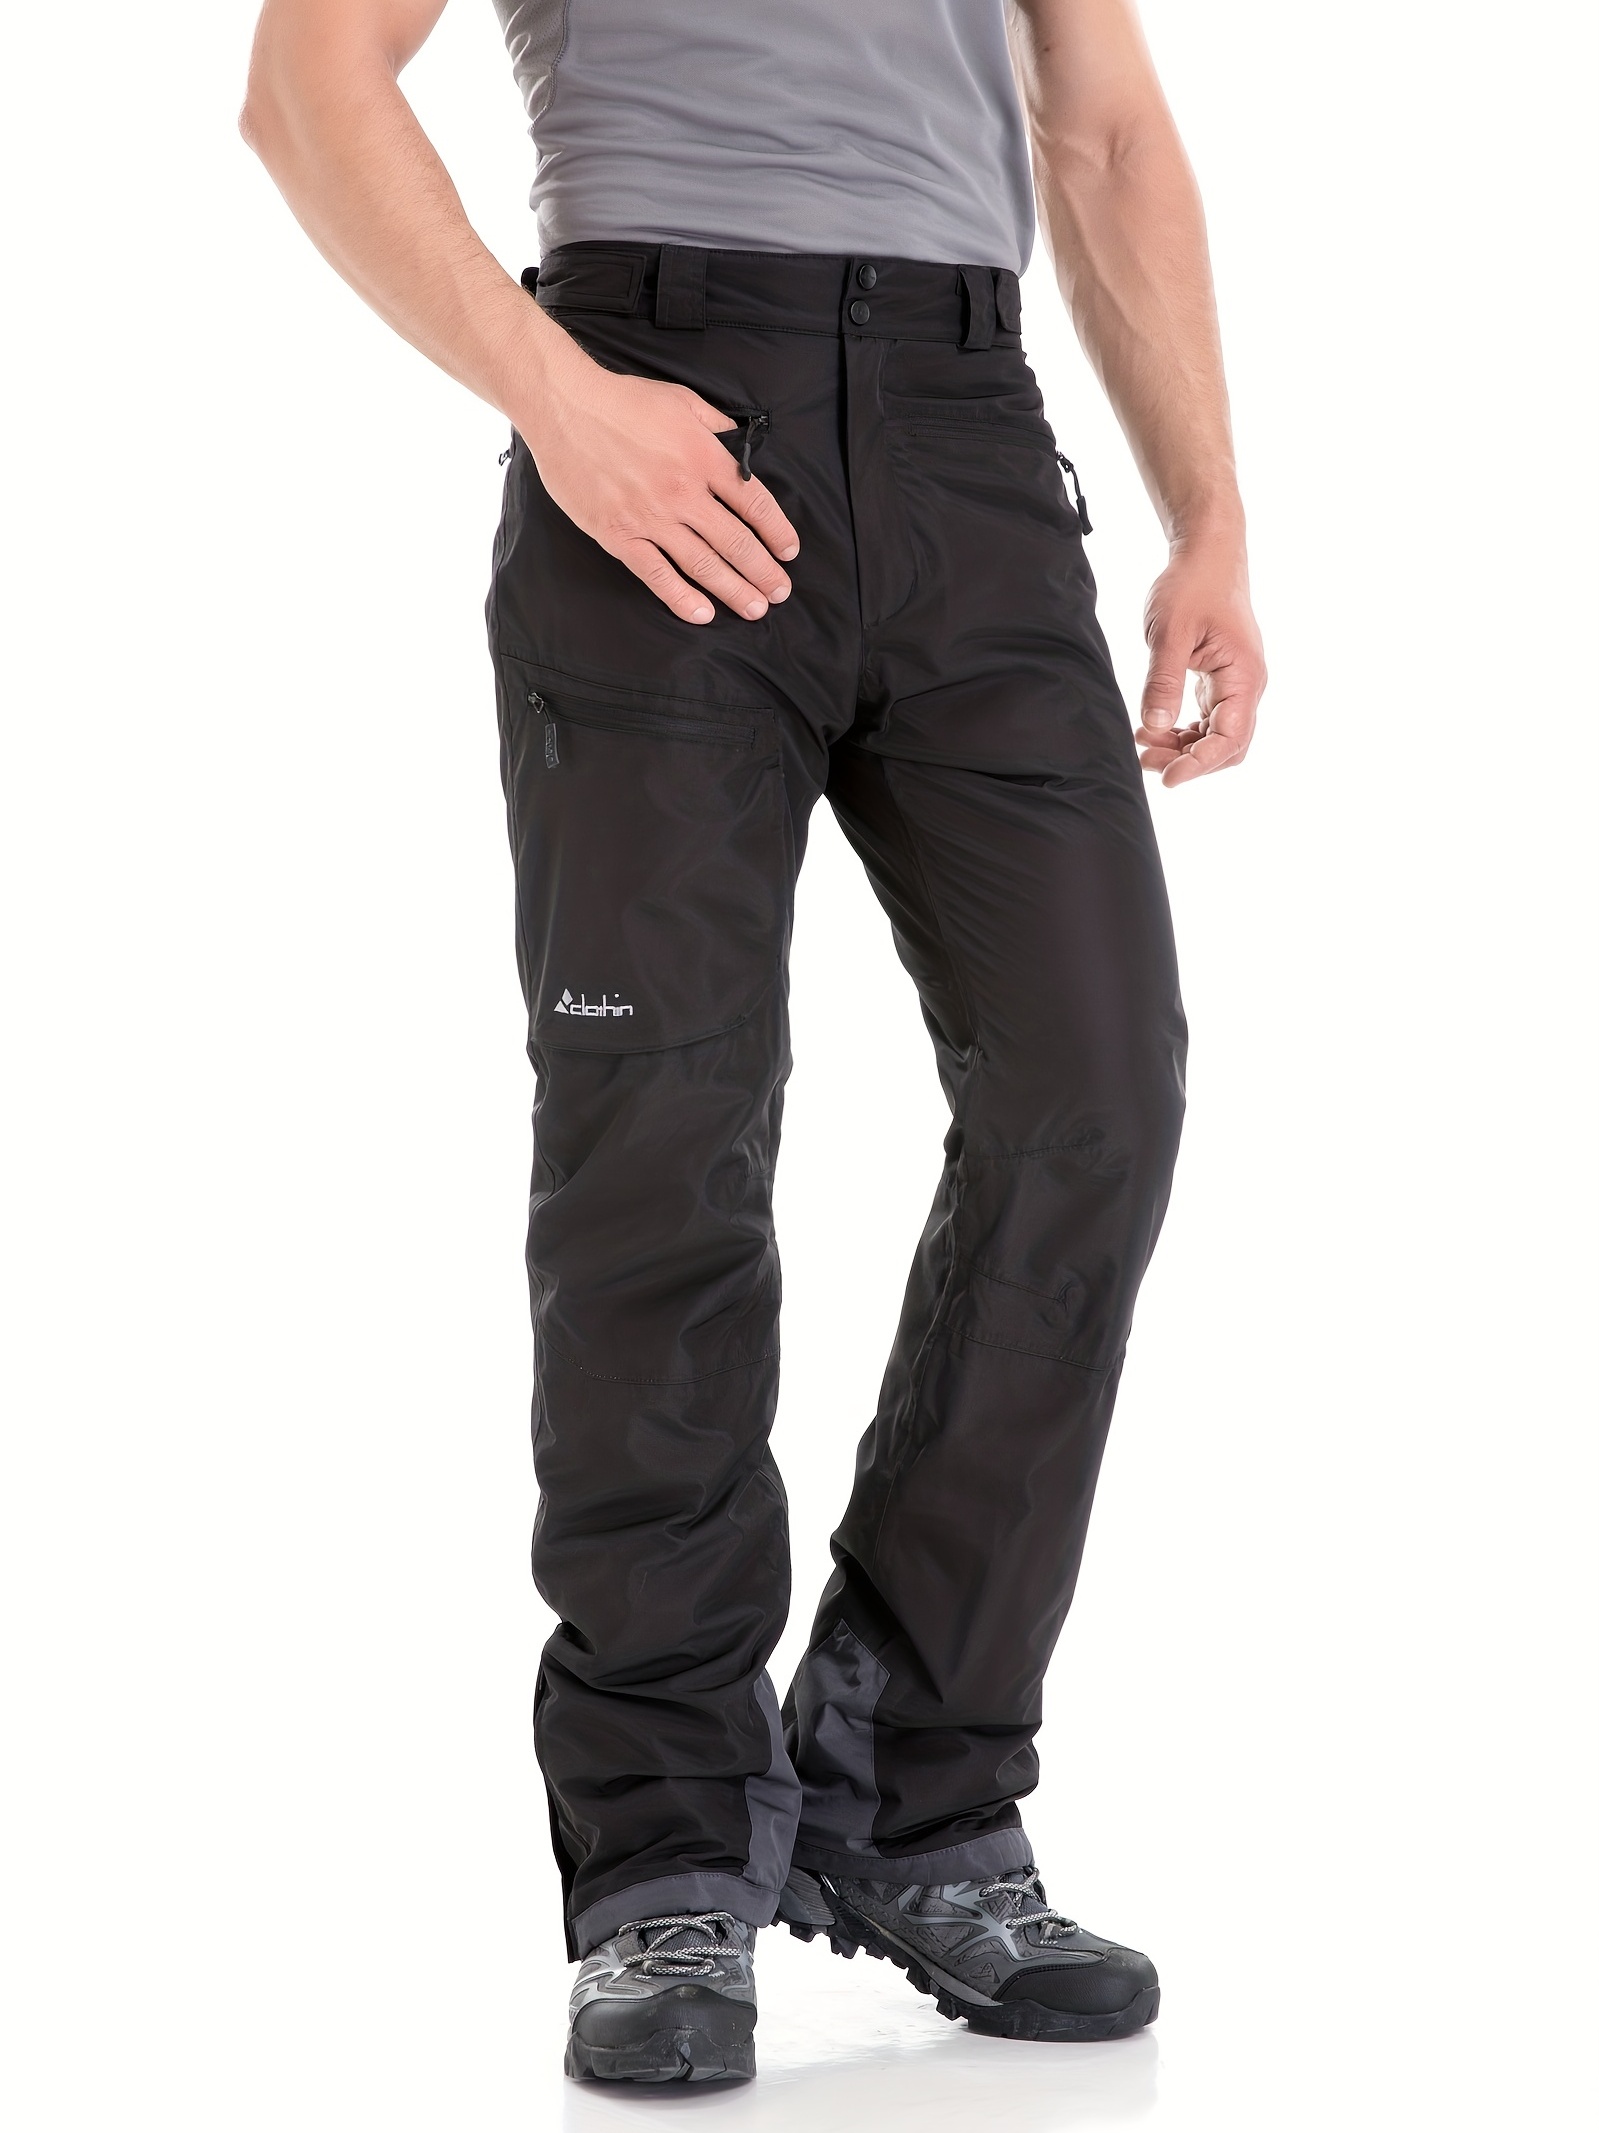 Spyder Men Dare Gore Tex Pants Male Outdoor Snow Ski Pant for Winter  Weather 